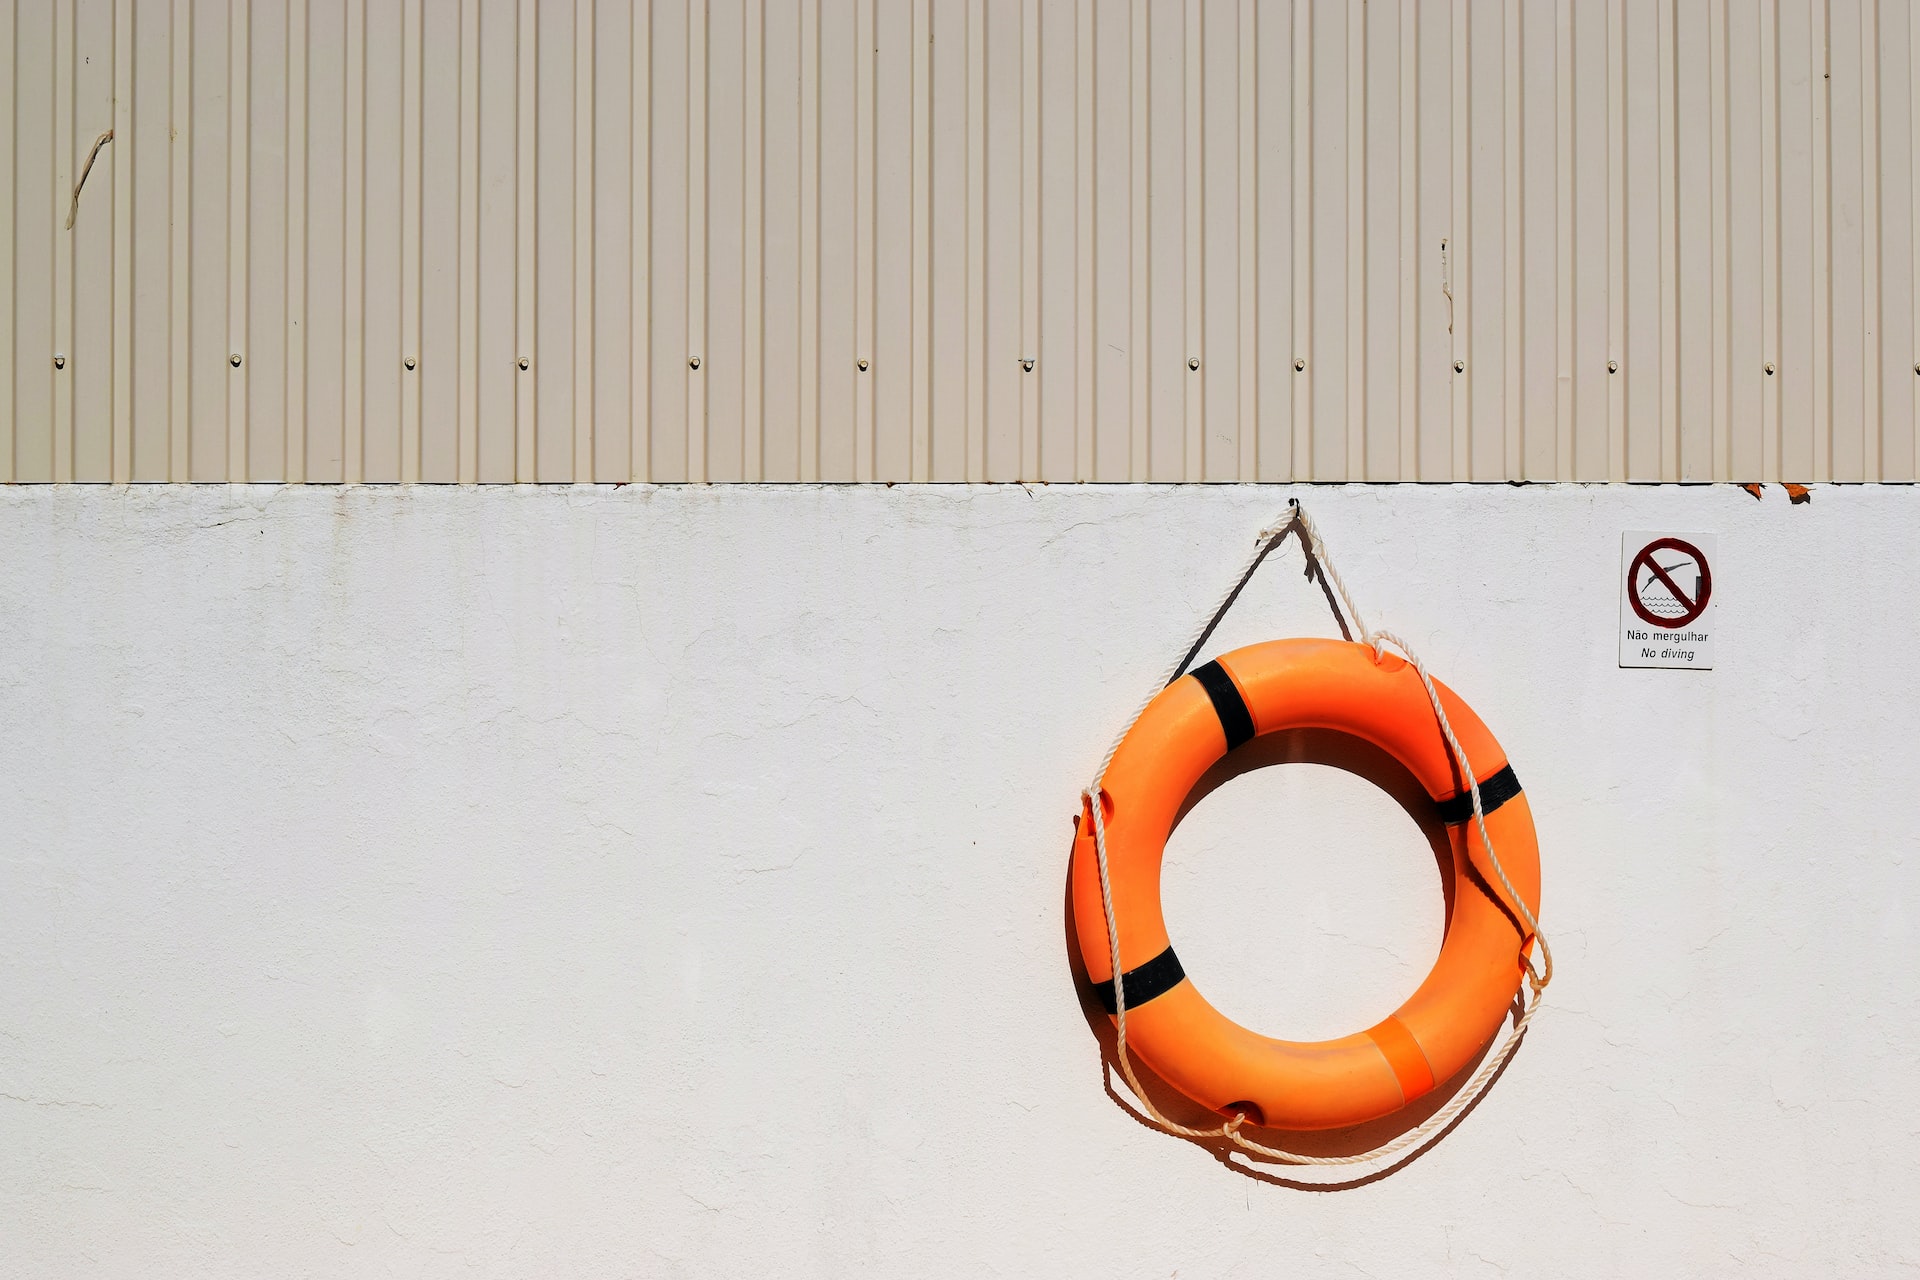 Emergency flotation device hanging against the wall.